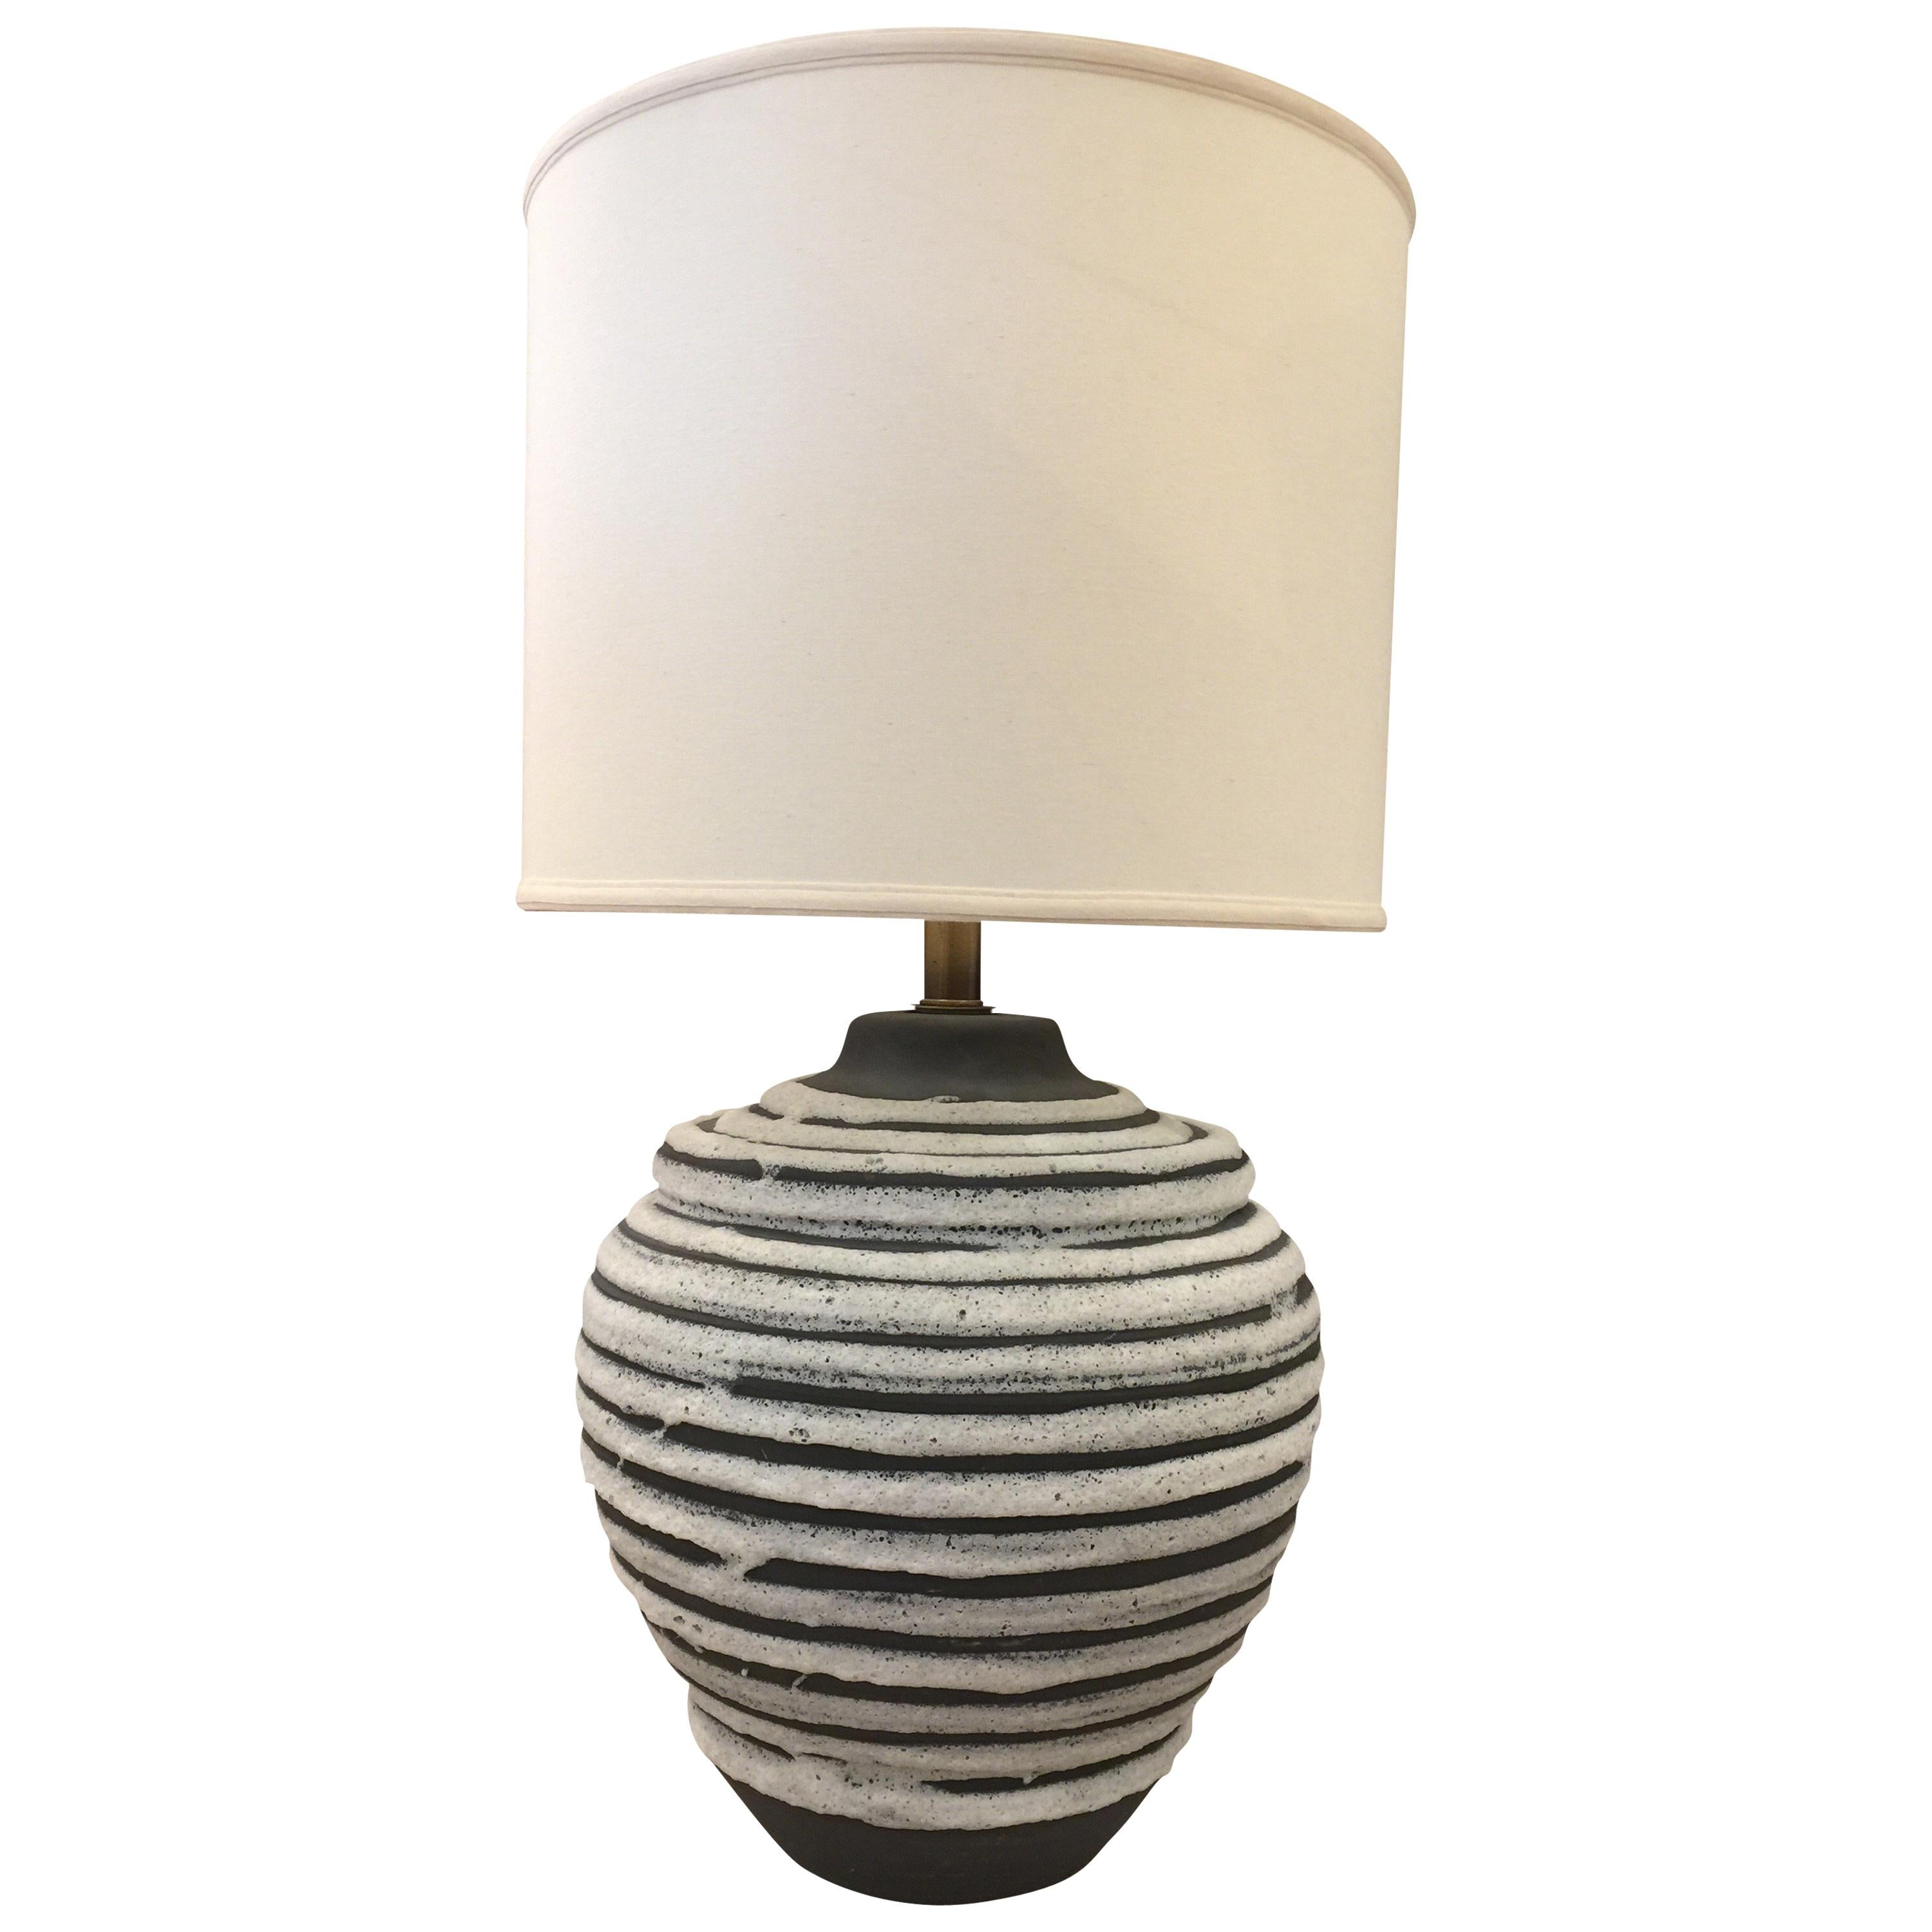 Oversized Beehive Style Pottery Lamp